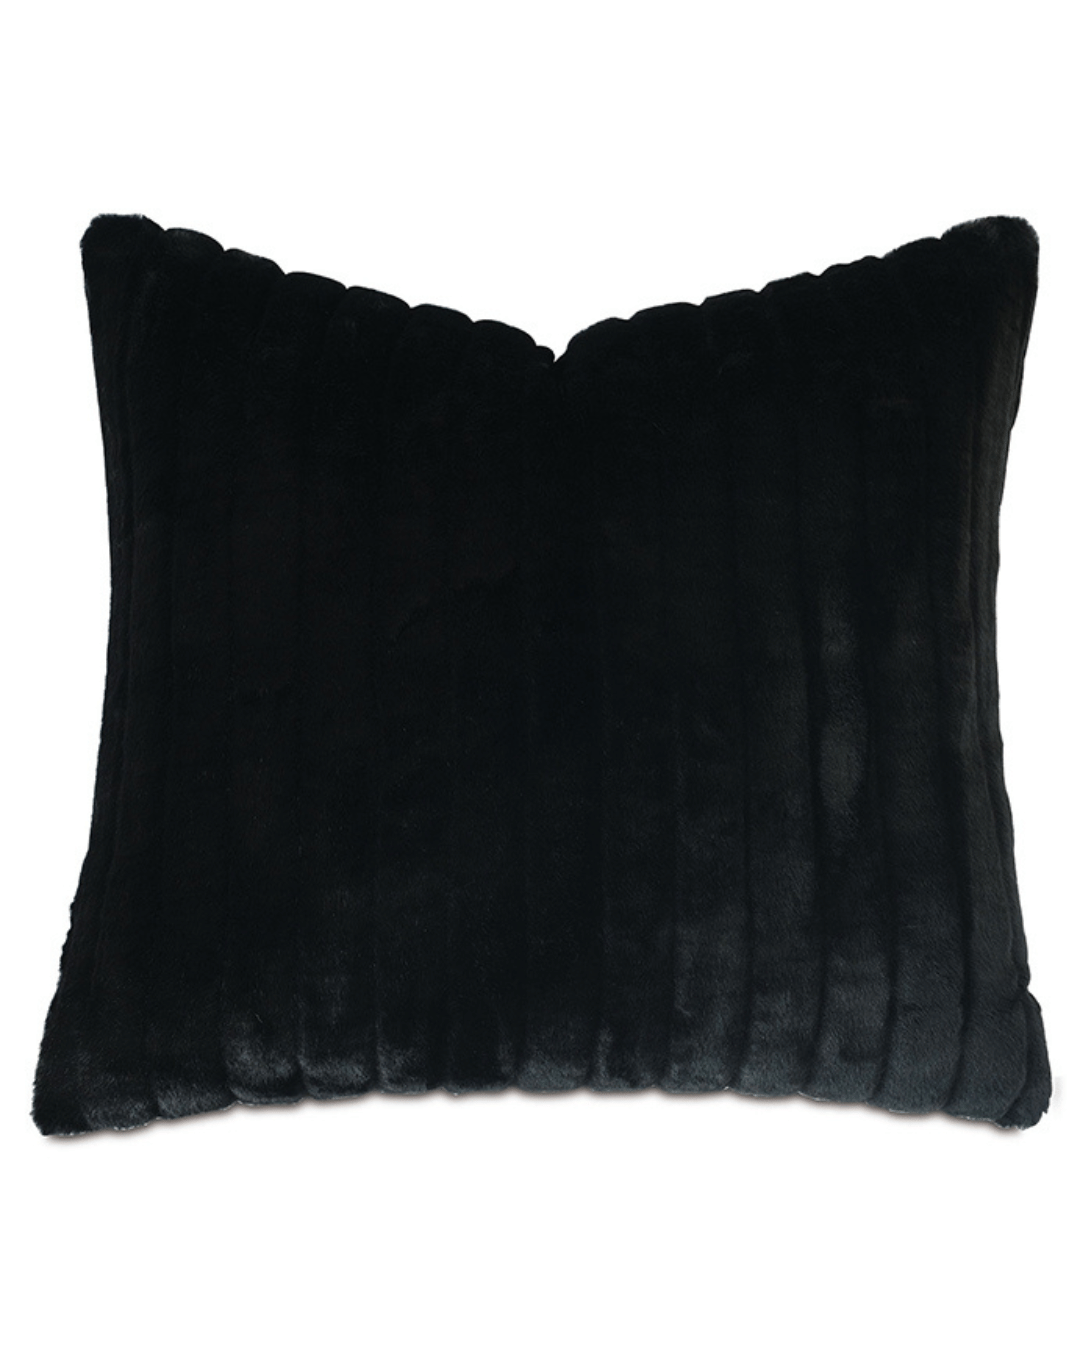 A FAUX FUR EURO SHAM 26x26 by Eastern Accents with a soft, velvet-like texture and vertical ridges running across the surface. The pillow features a plush down feather insert, making it fluffy and perfect for decorative or comfort use.